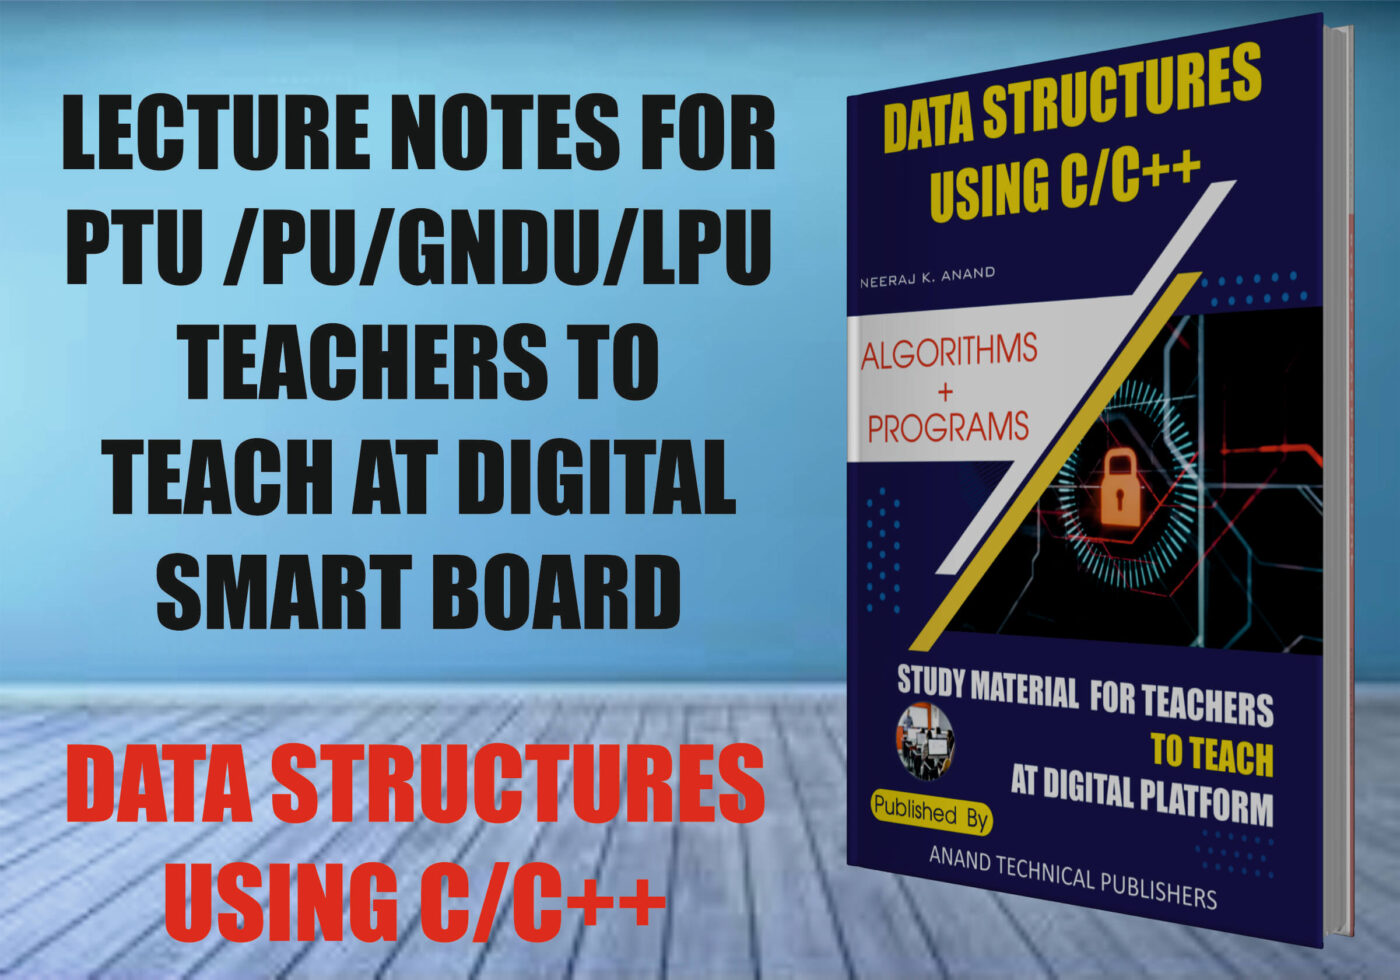 Data Structure-String Processing|GNDU PU PTU LPU EBook Lecture Notes Study Material BSc Computer Science IT BCA Download pdf by Anand Technical Publishers Neeraj K Anand Param Anand